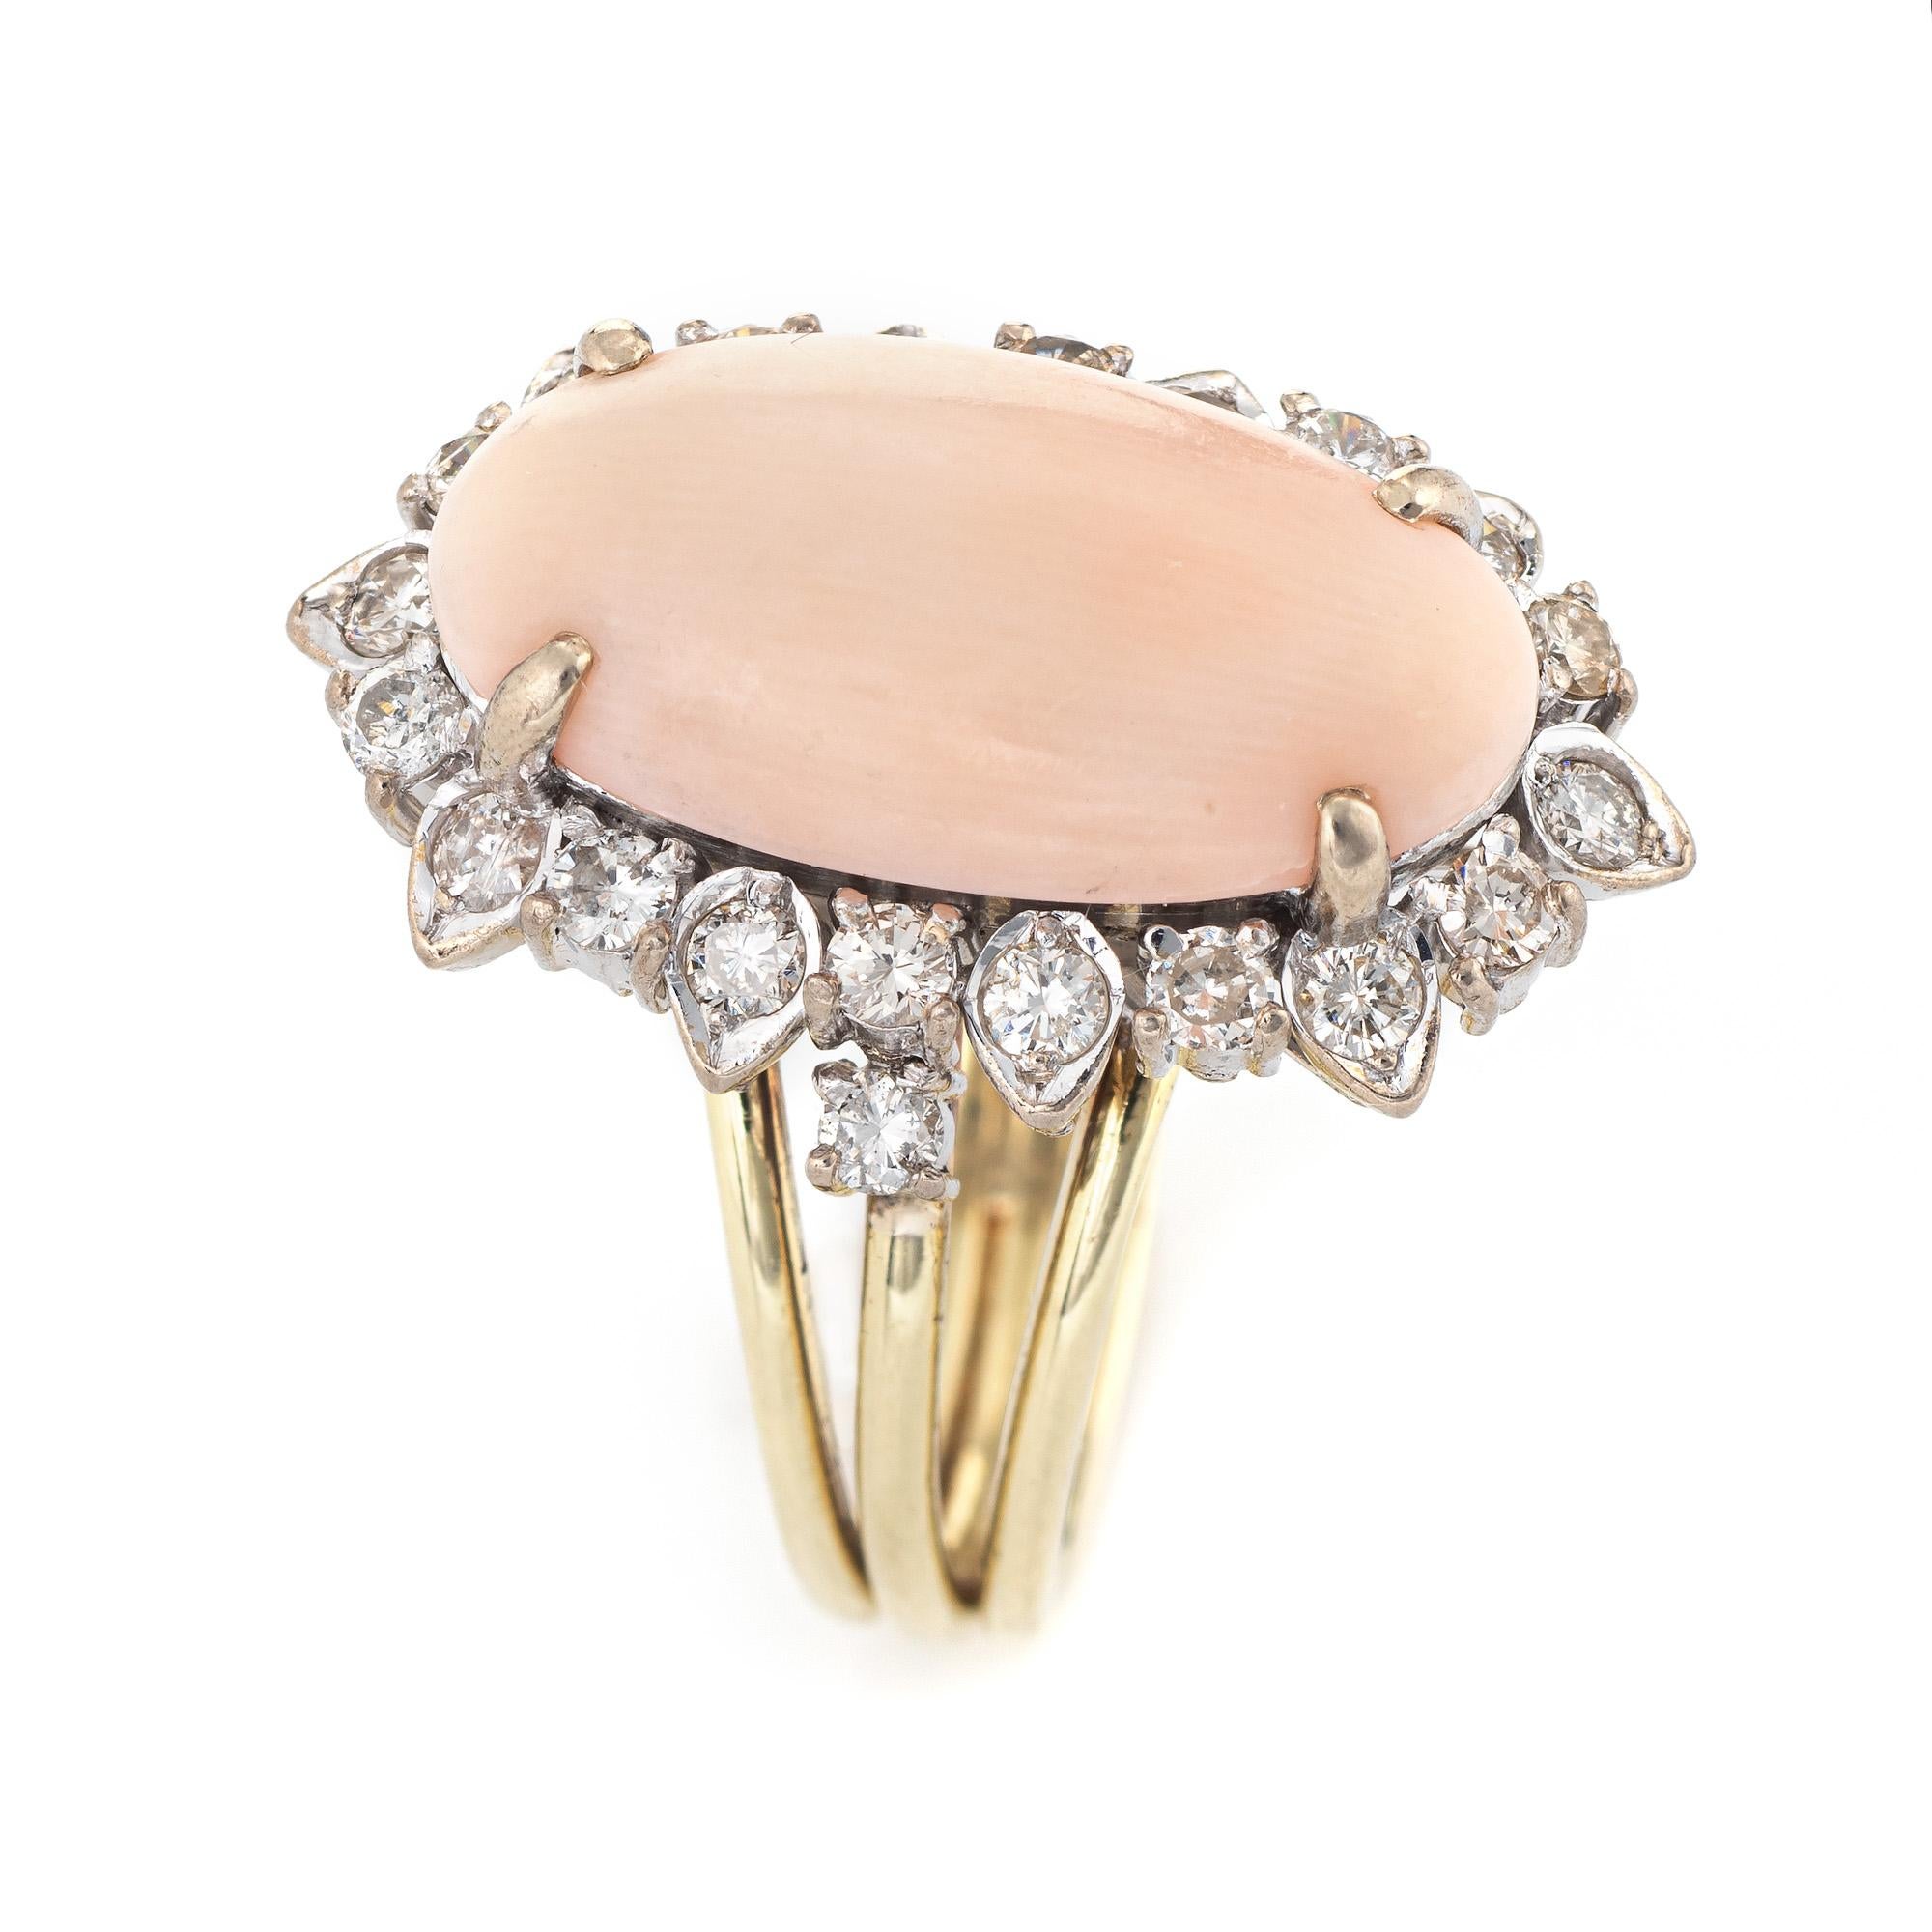 Stylish vintage coral & diamond cocktail ring (circa 1950s to 1960s) crafted in 14 karat white gold. 

Angel skin coral is cabochon cut measuring 17mm x 9mm (estimated at 4.50 carats), accented with 23 estimated 0.02 carat diamonds. The total